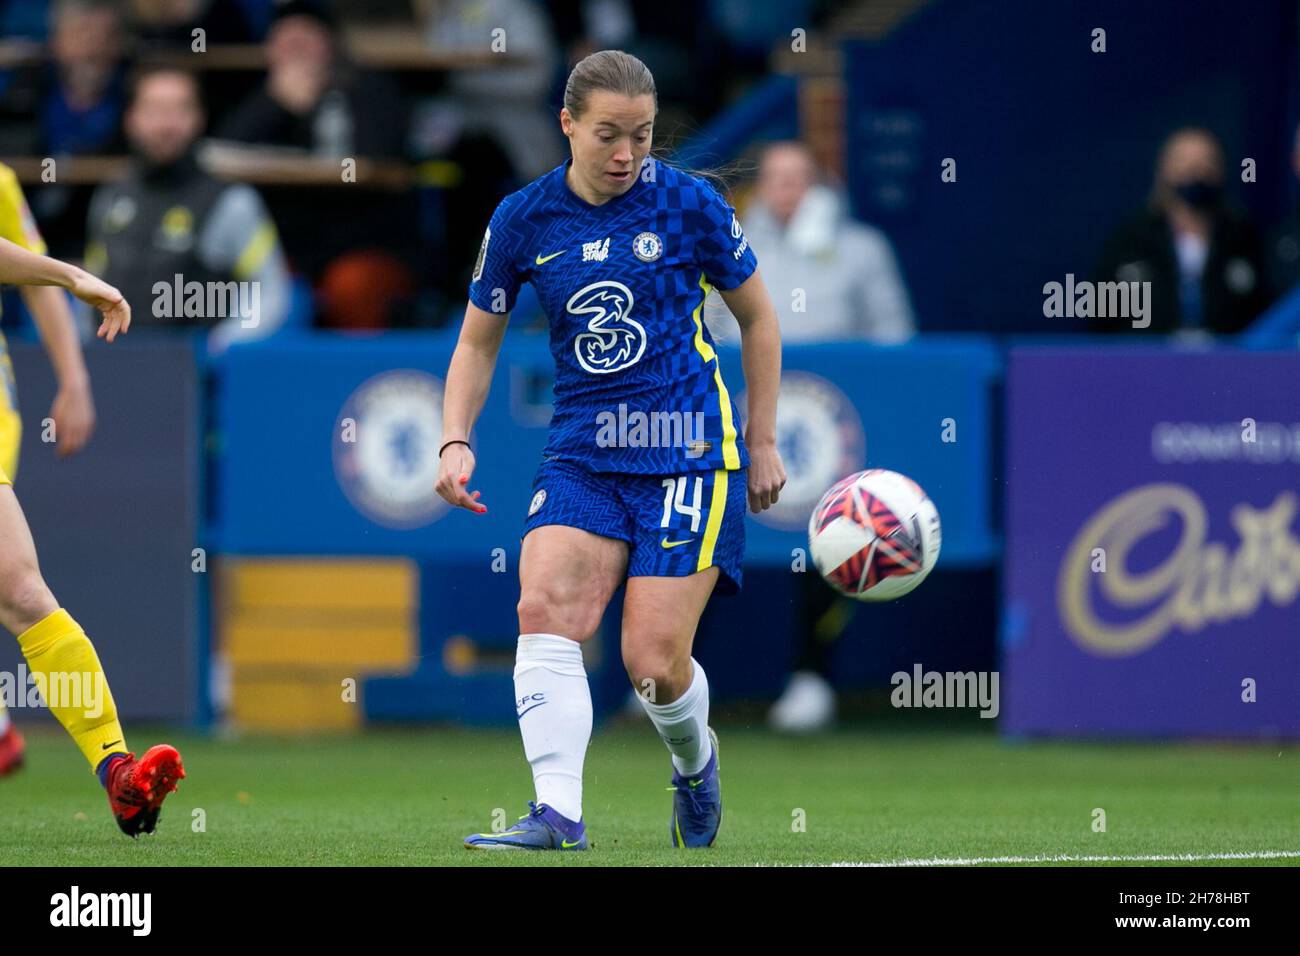 London, UK. 21st Nov, 2021. LONDON, UK. NOVEMBER 21ST : Fran Kirby of Chelsea FC scores during the 2021-22 FA Womens Superleague fixture between Chelsea FC and Birmingham City at Kingsmeadow. Credit: Federico Guerra Morán/Alamy Live News Stock Photo